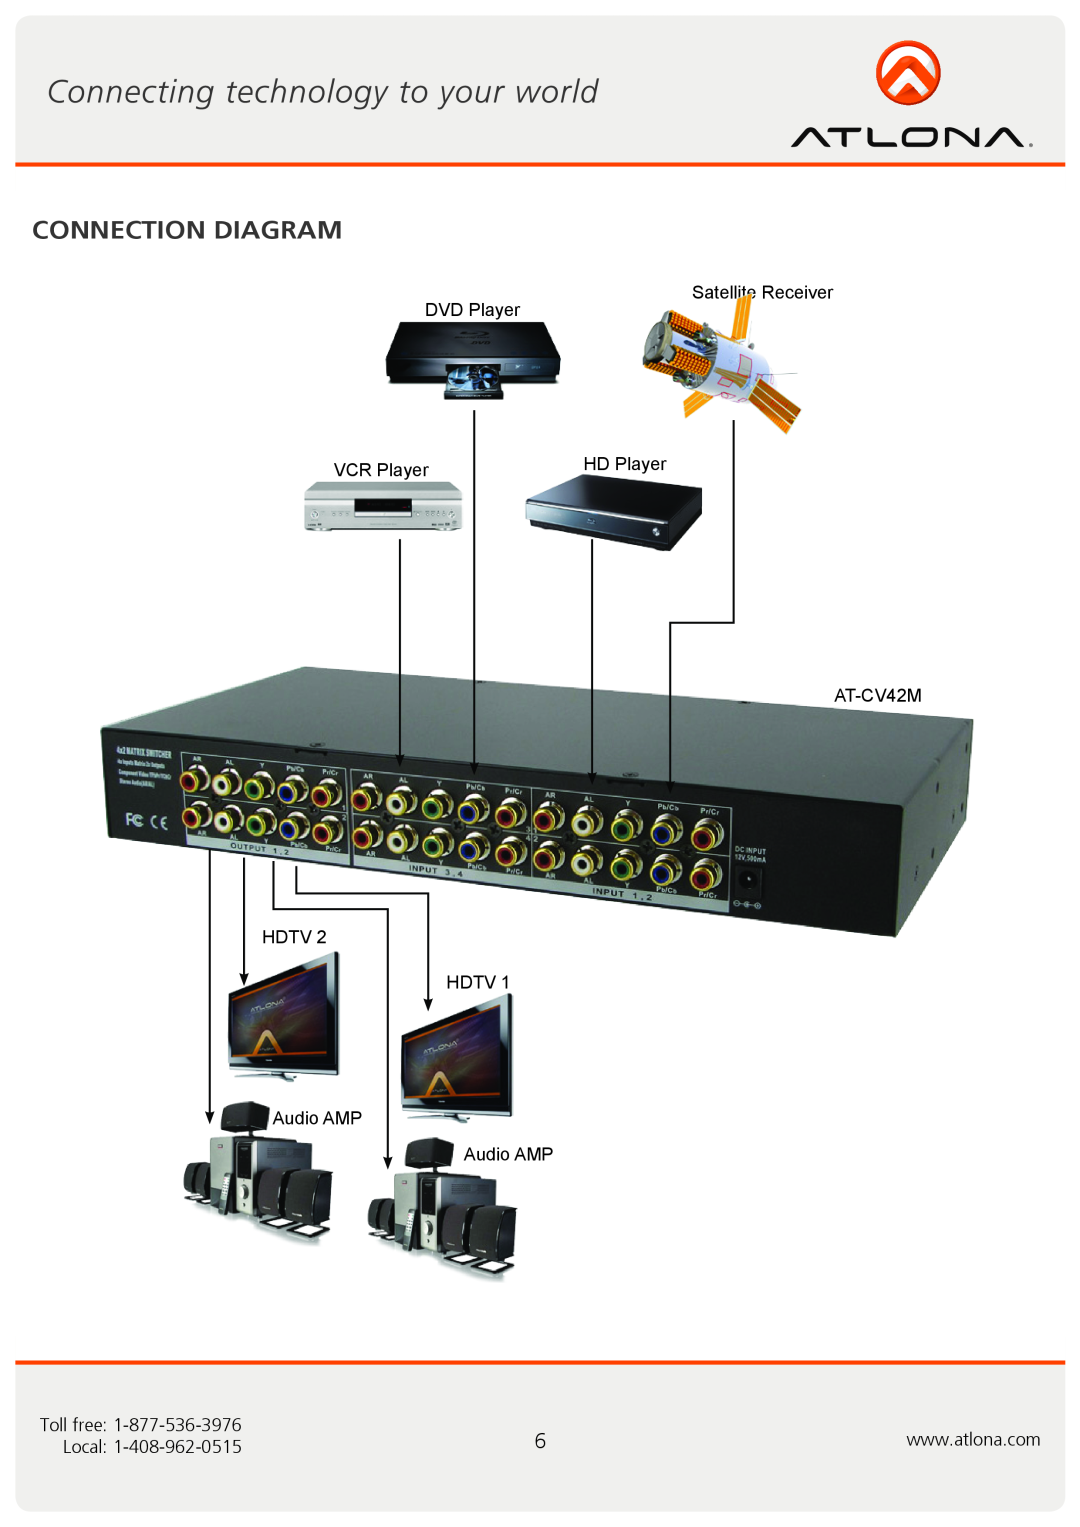 Atlona AT-CV42M user manual Connection Diagram, DVD Player, Satellite Receiver, VCR Player, HD Player, Toll free, Local 